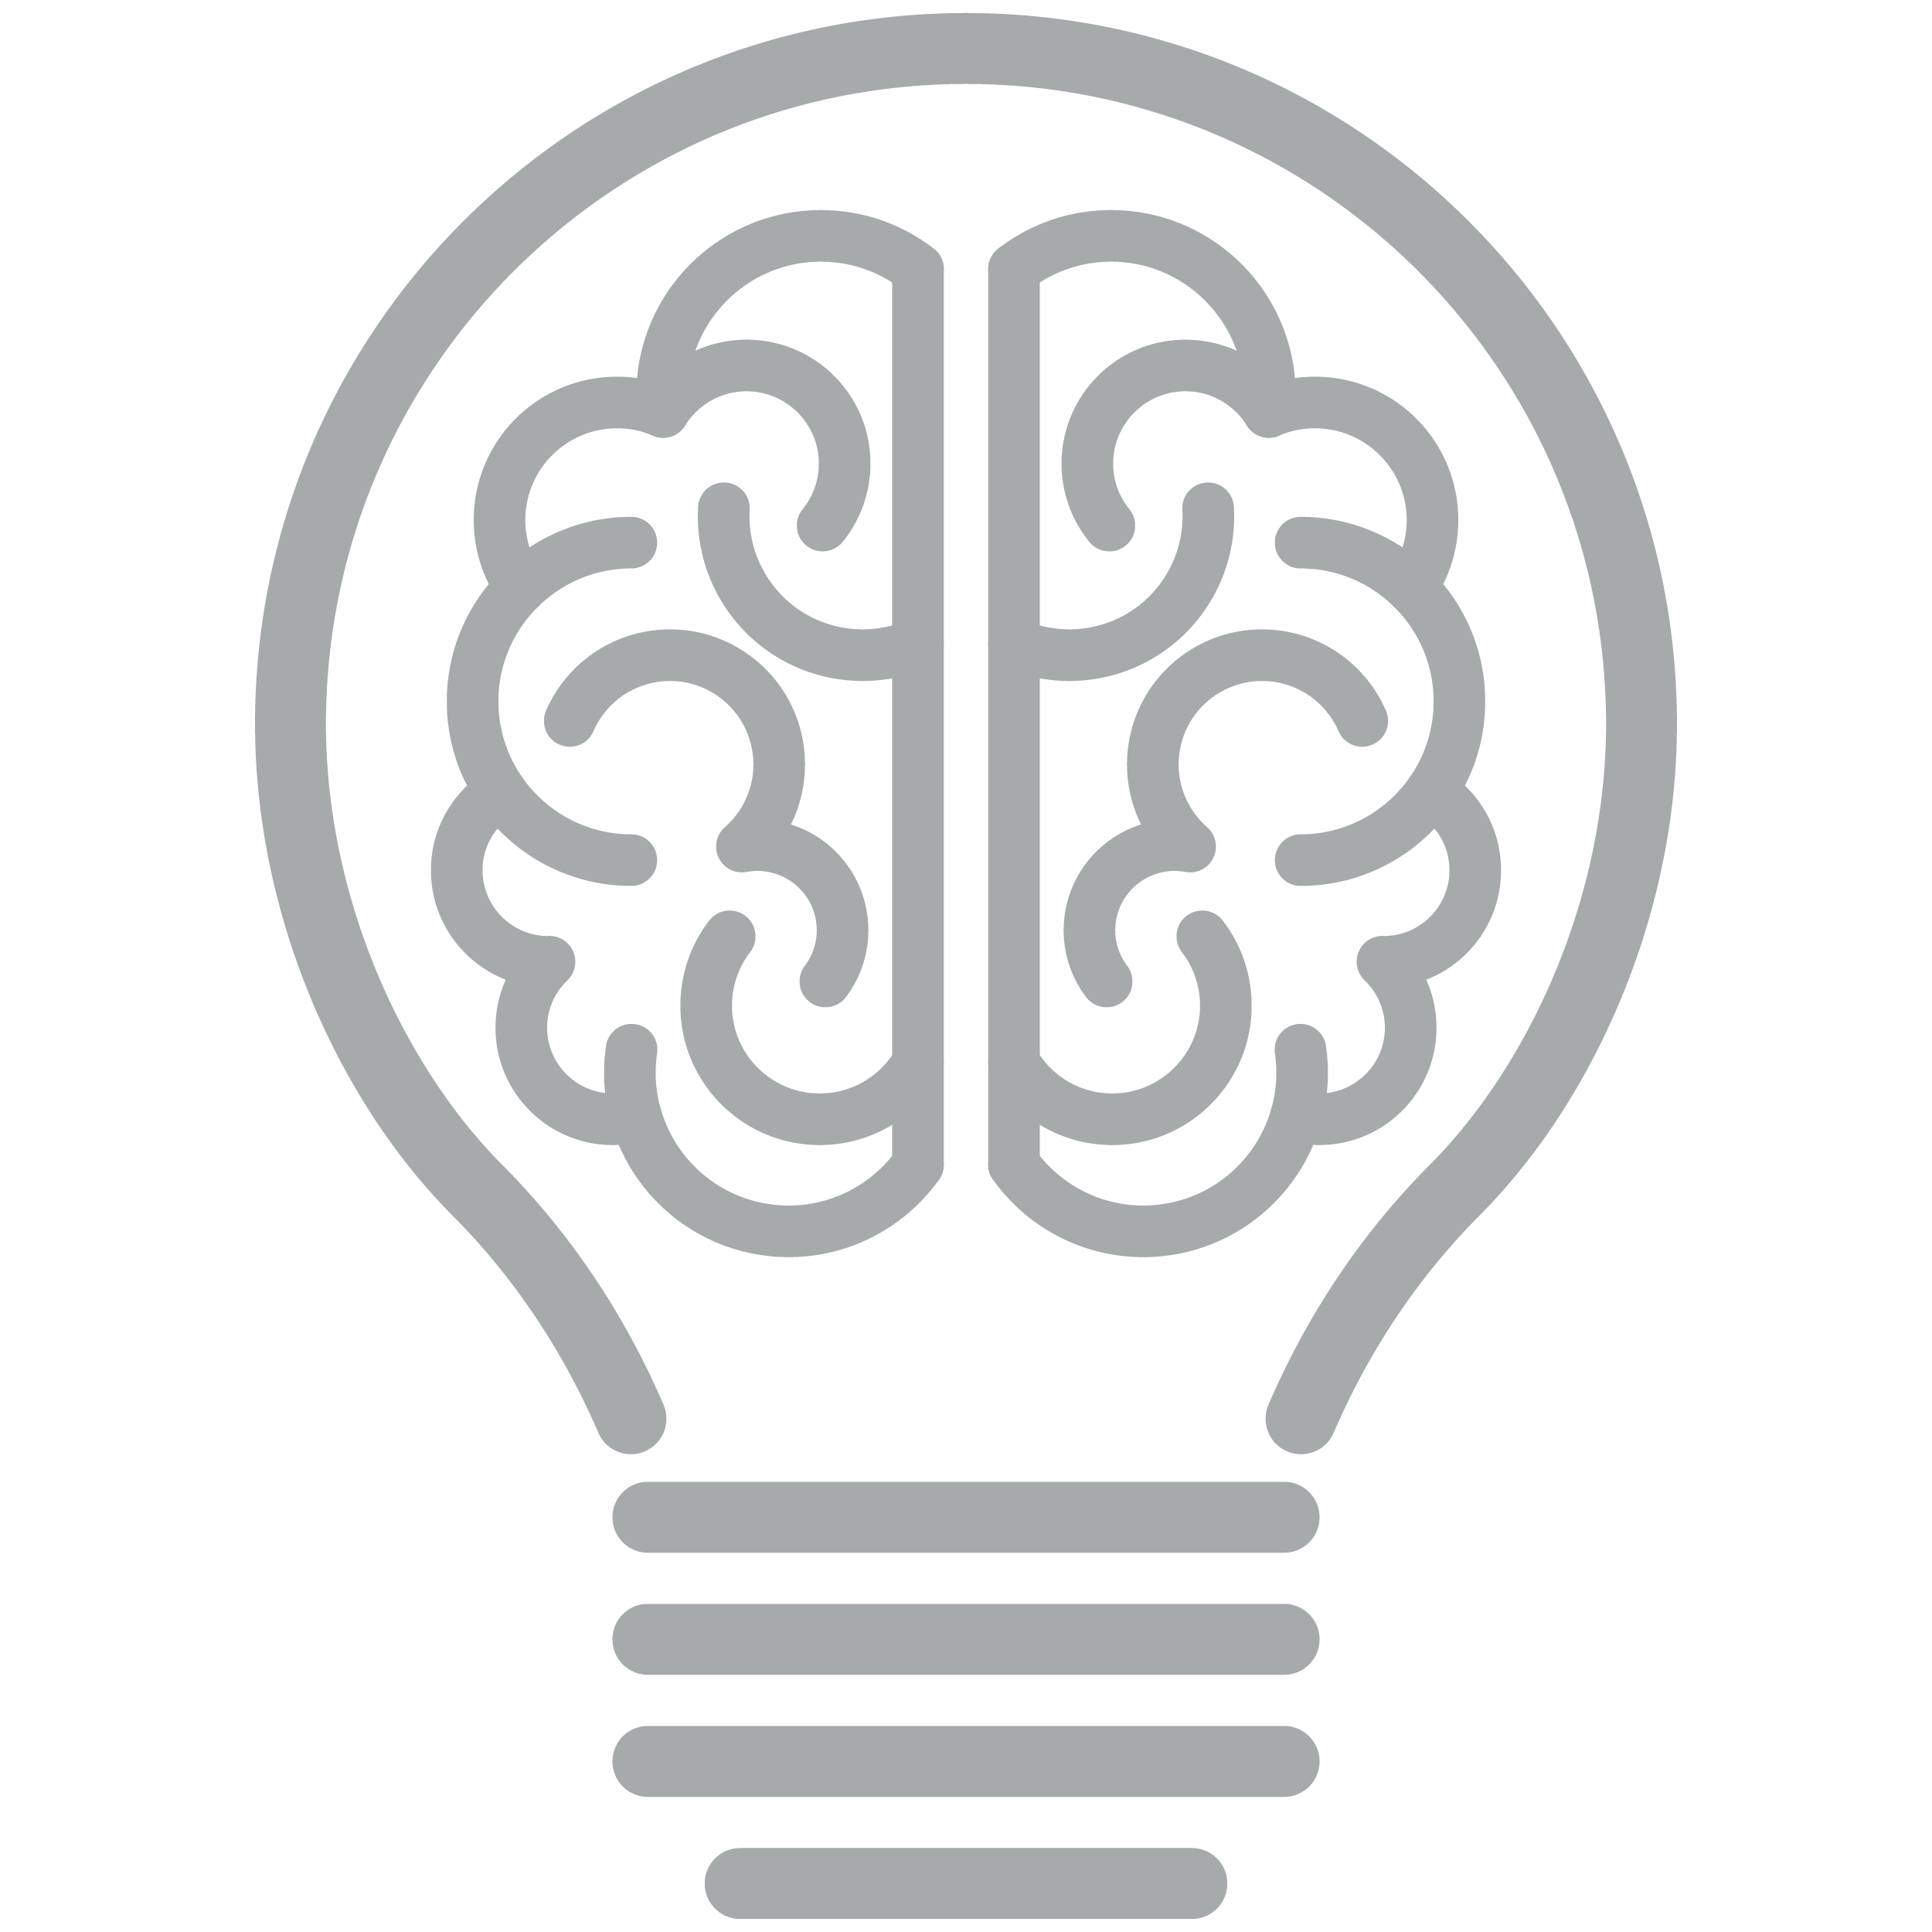 An icon of a lightbulb with a brain inside